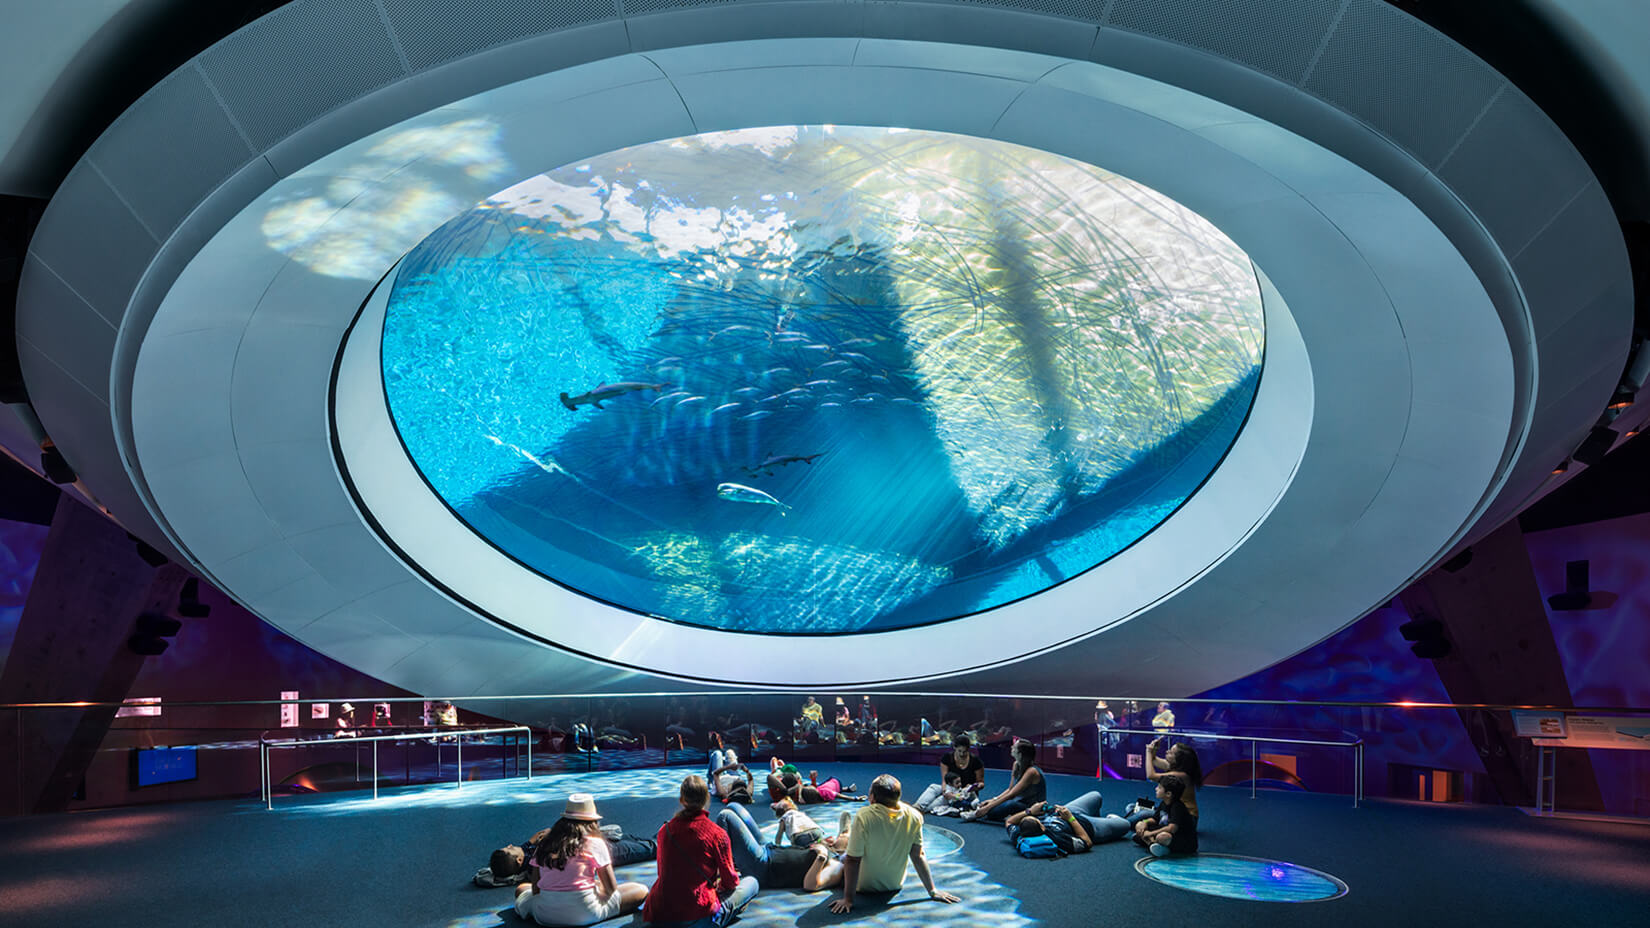 picture depicting a floating aquarium bowl with visitors resting underneath